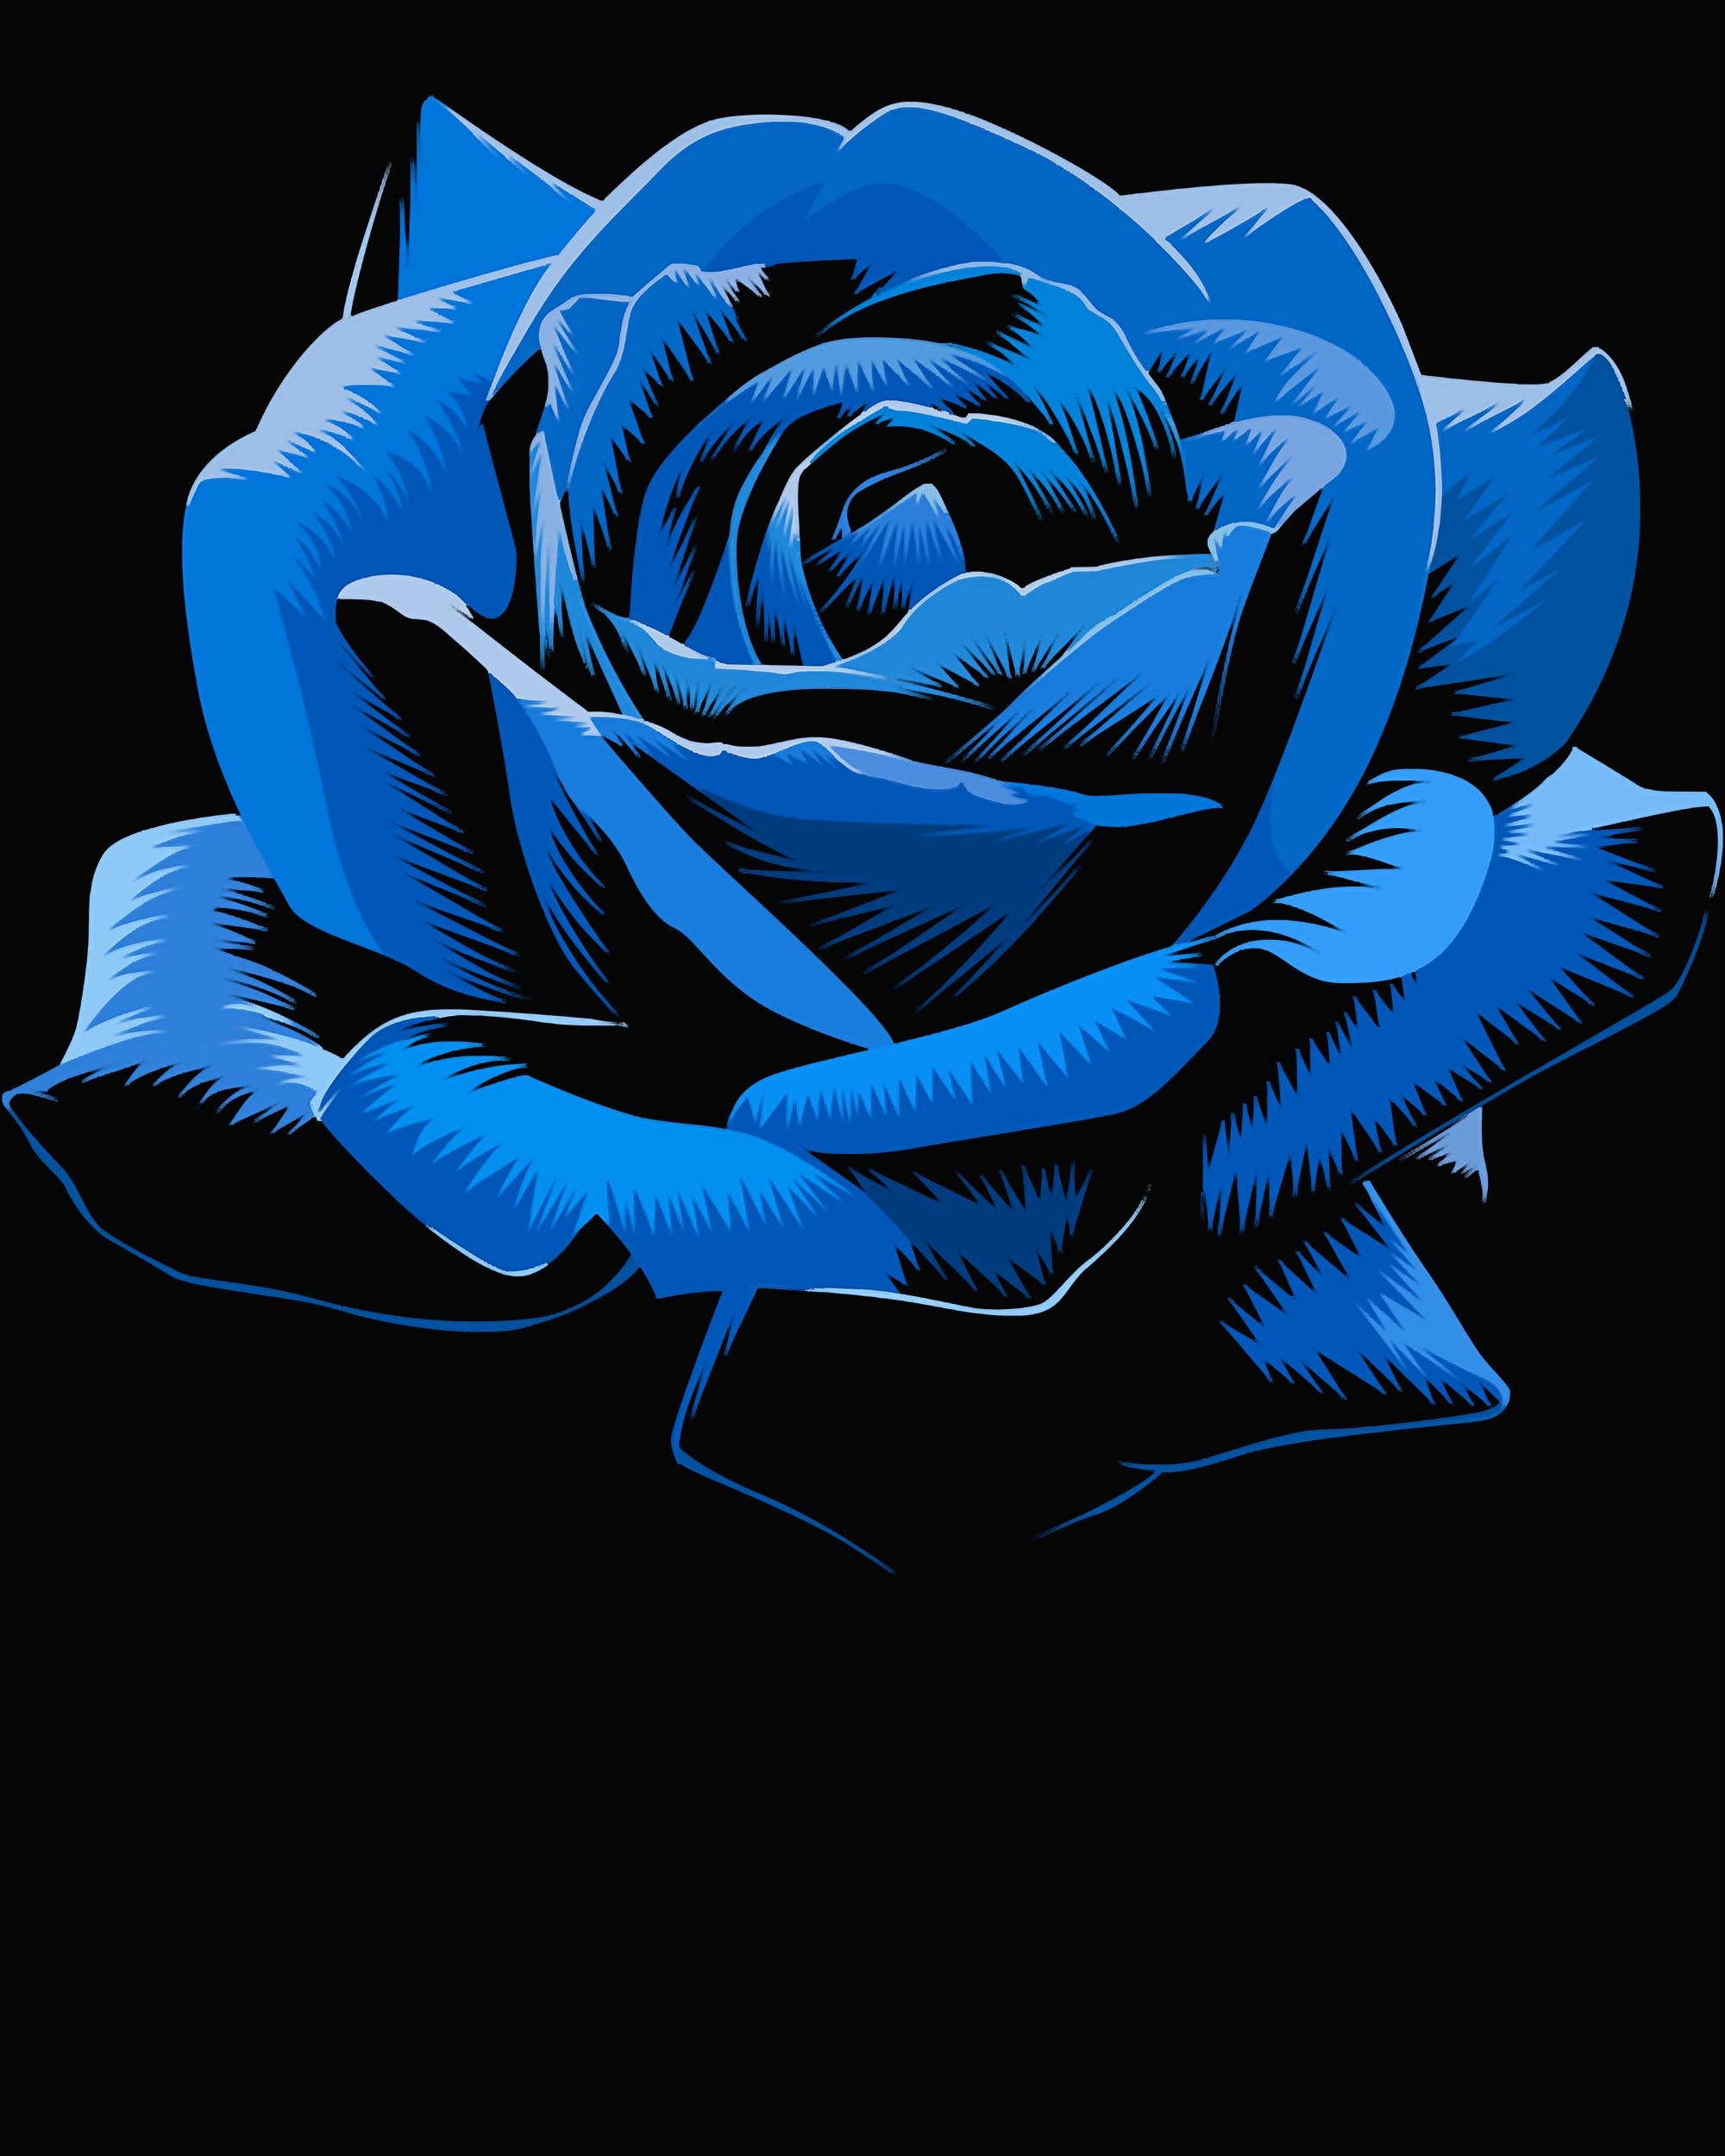 Blue Rose Cute And Beautiful Flower Png Blue Rose Design | Etsy